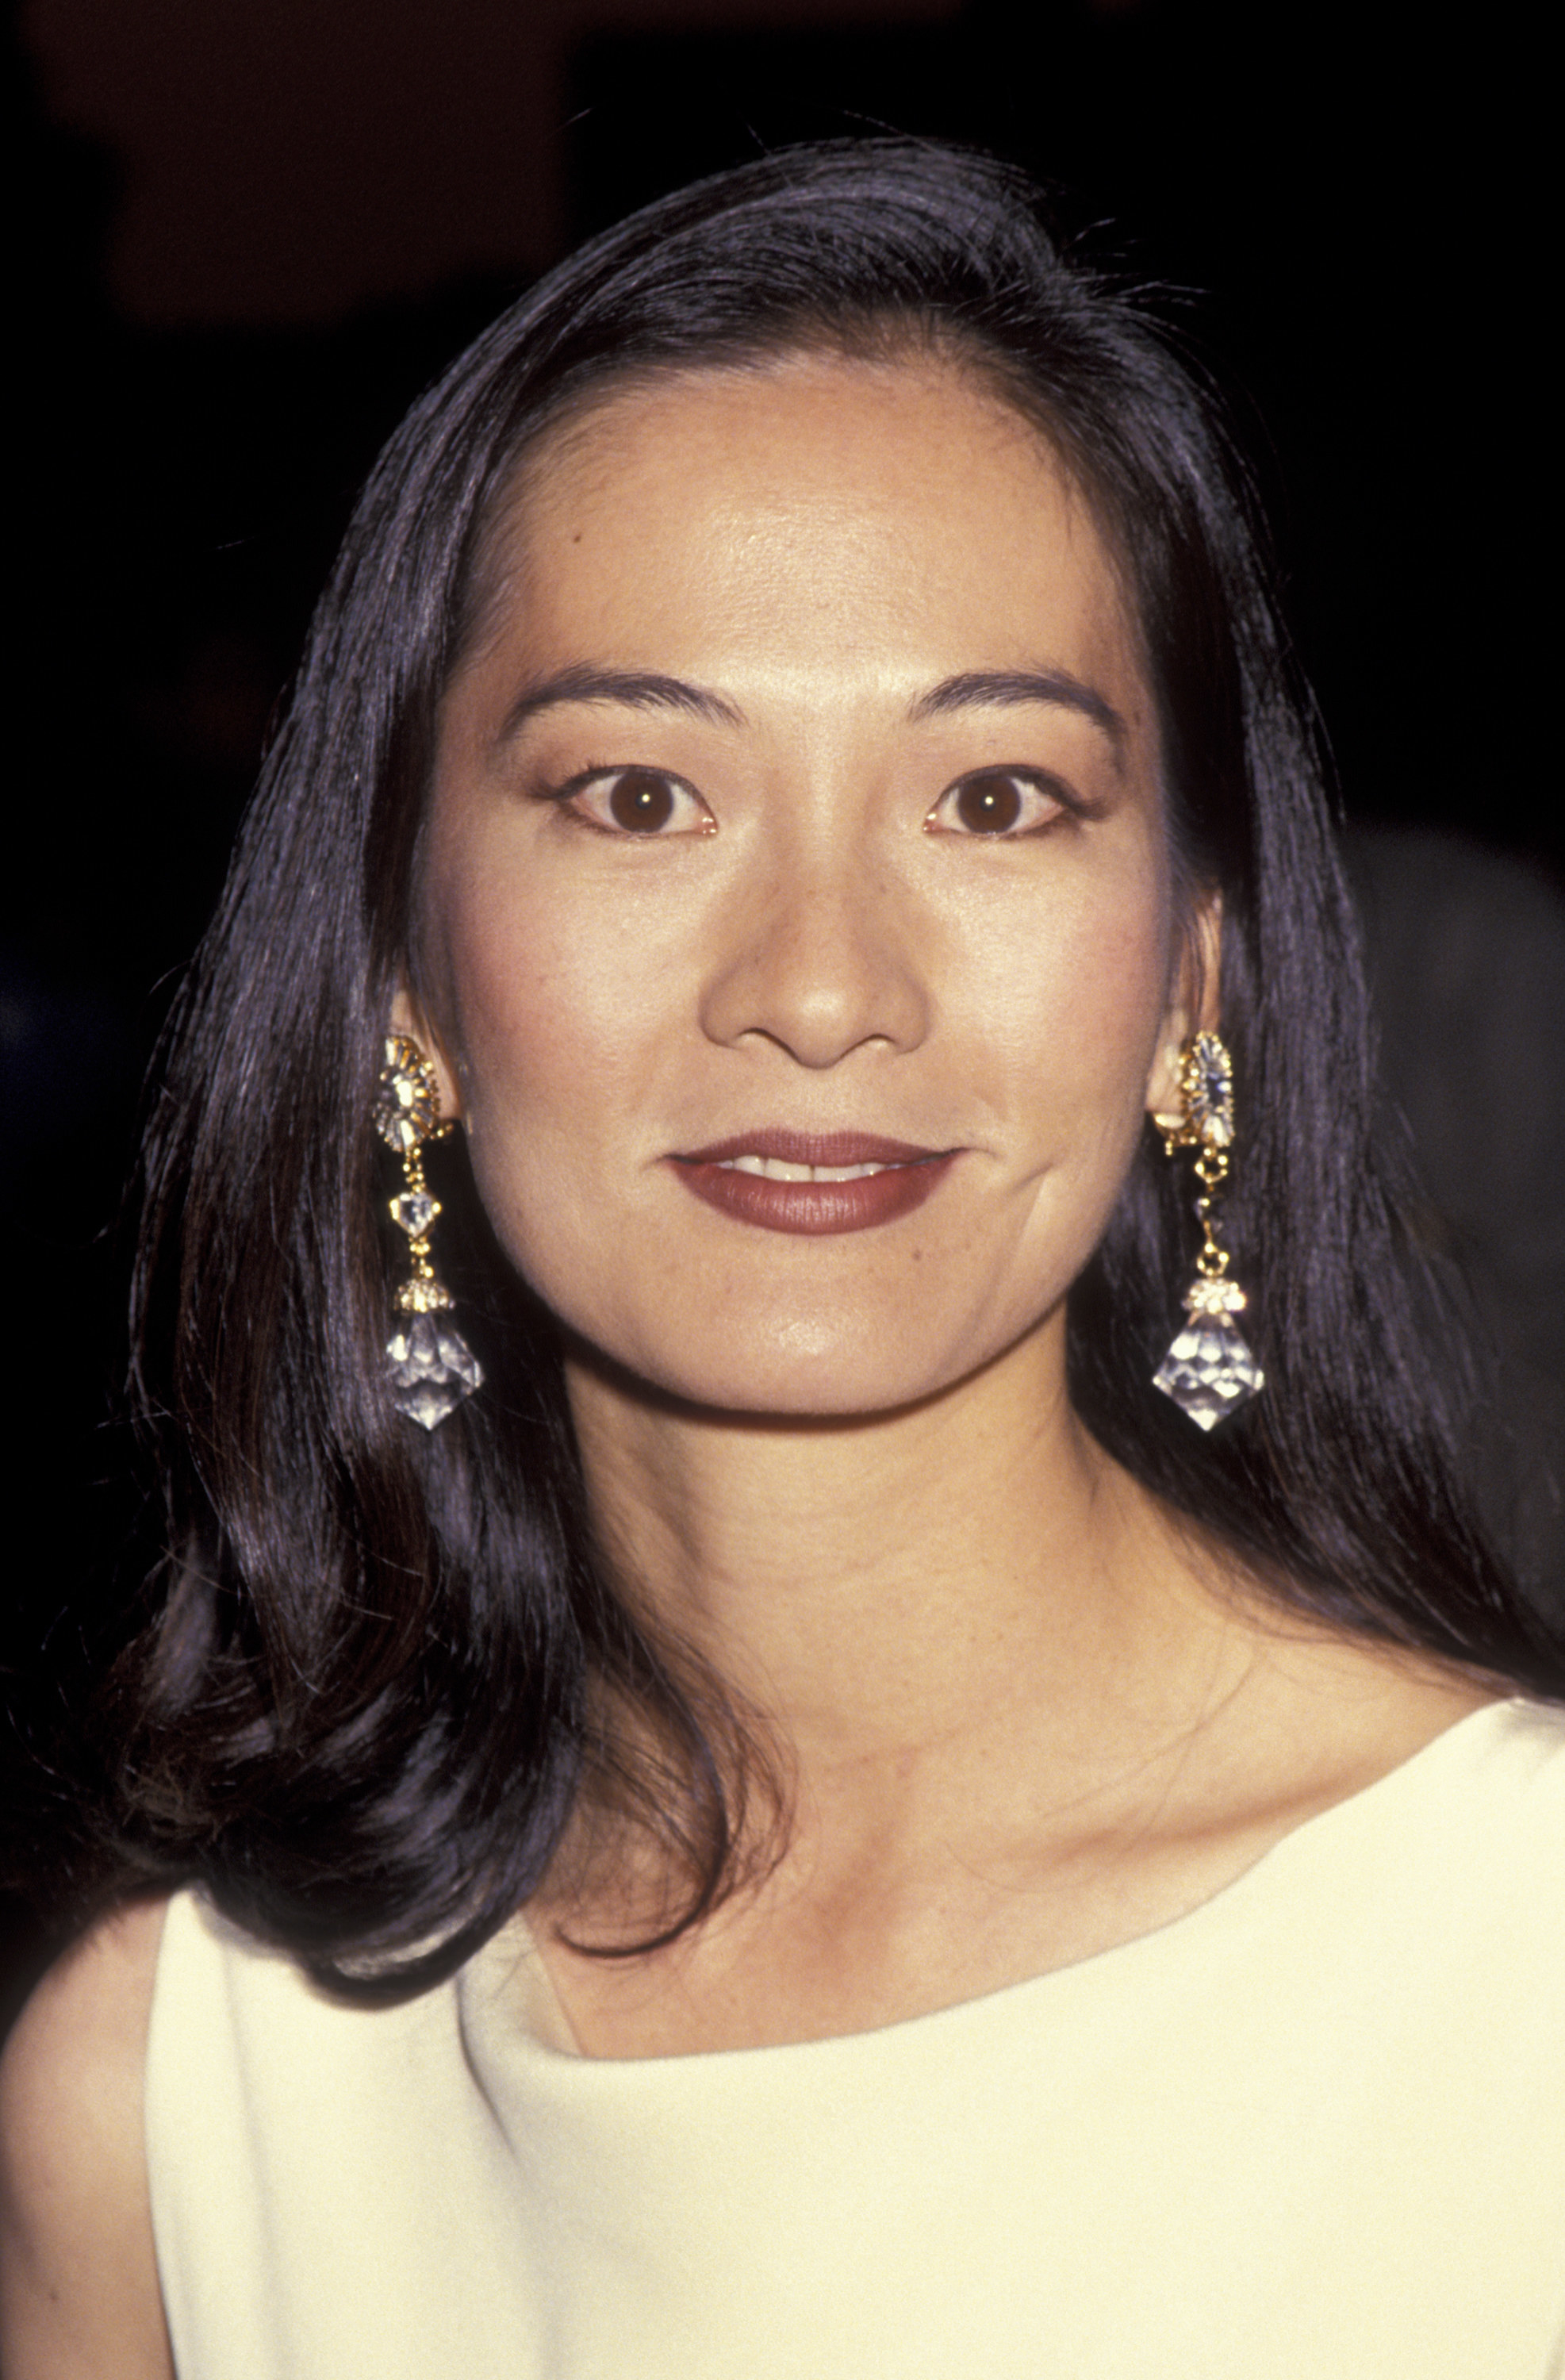 Rosalind Chao attends 26th Annual NAACP Image Awards on January 5, 1993 at the Pasadena Civic Auditorium in Pasadena, California